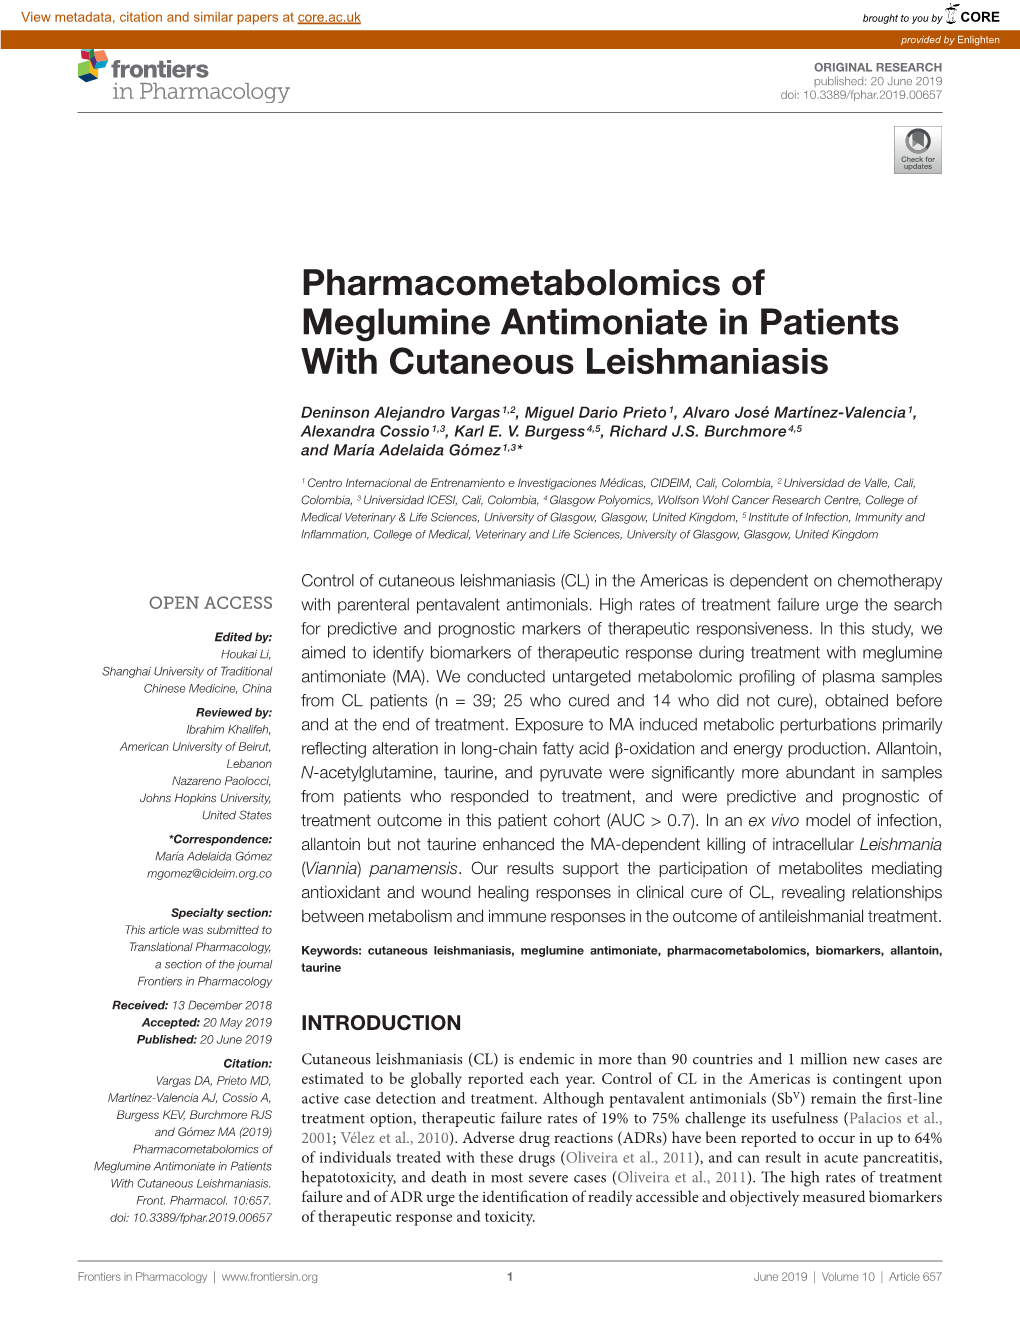 Pharmacometabolomics of Meglumine Antimoniate in Patients with Cutaneous Leishmaniasis